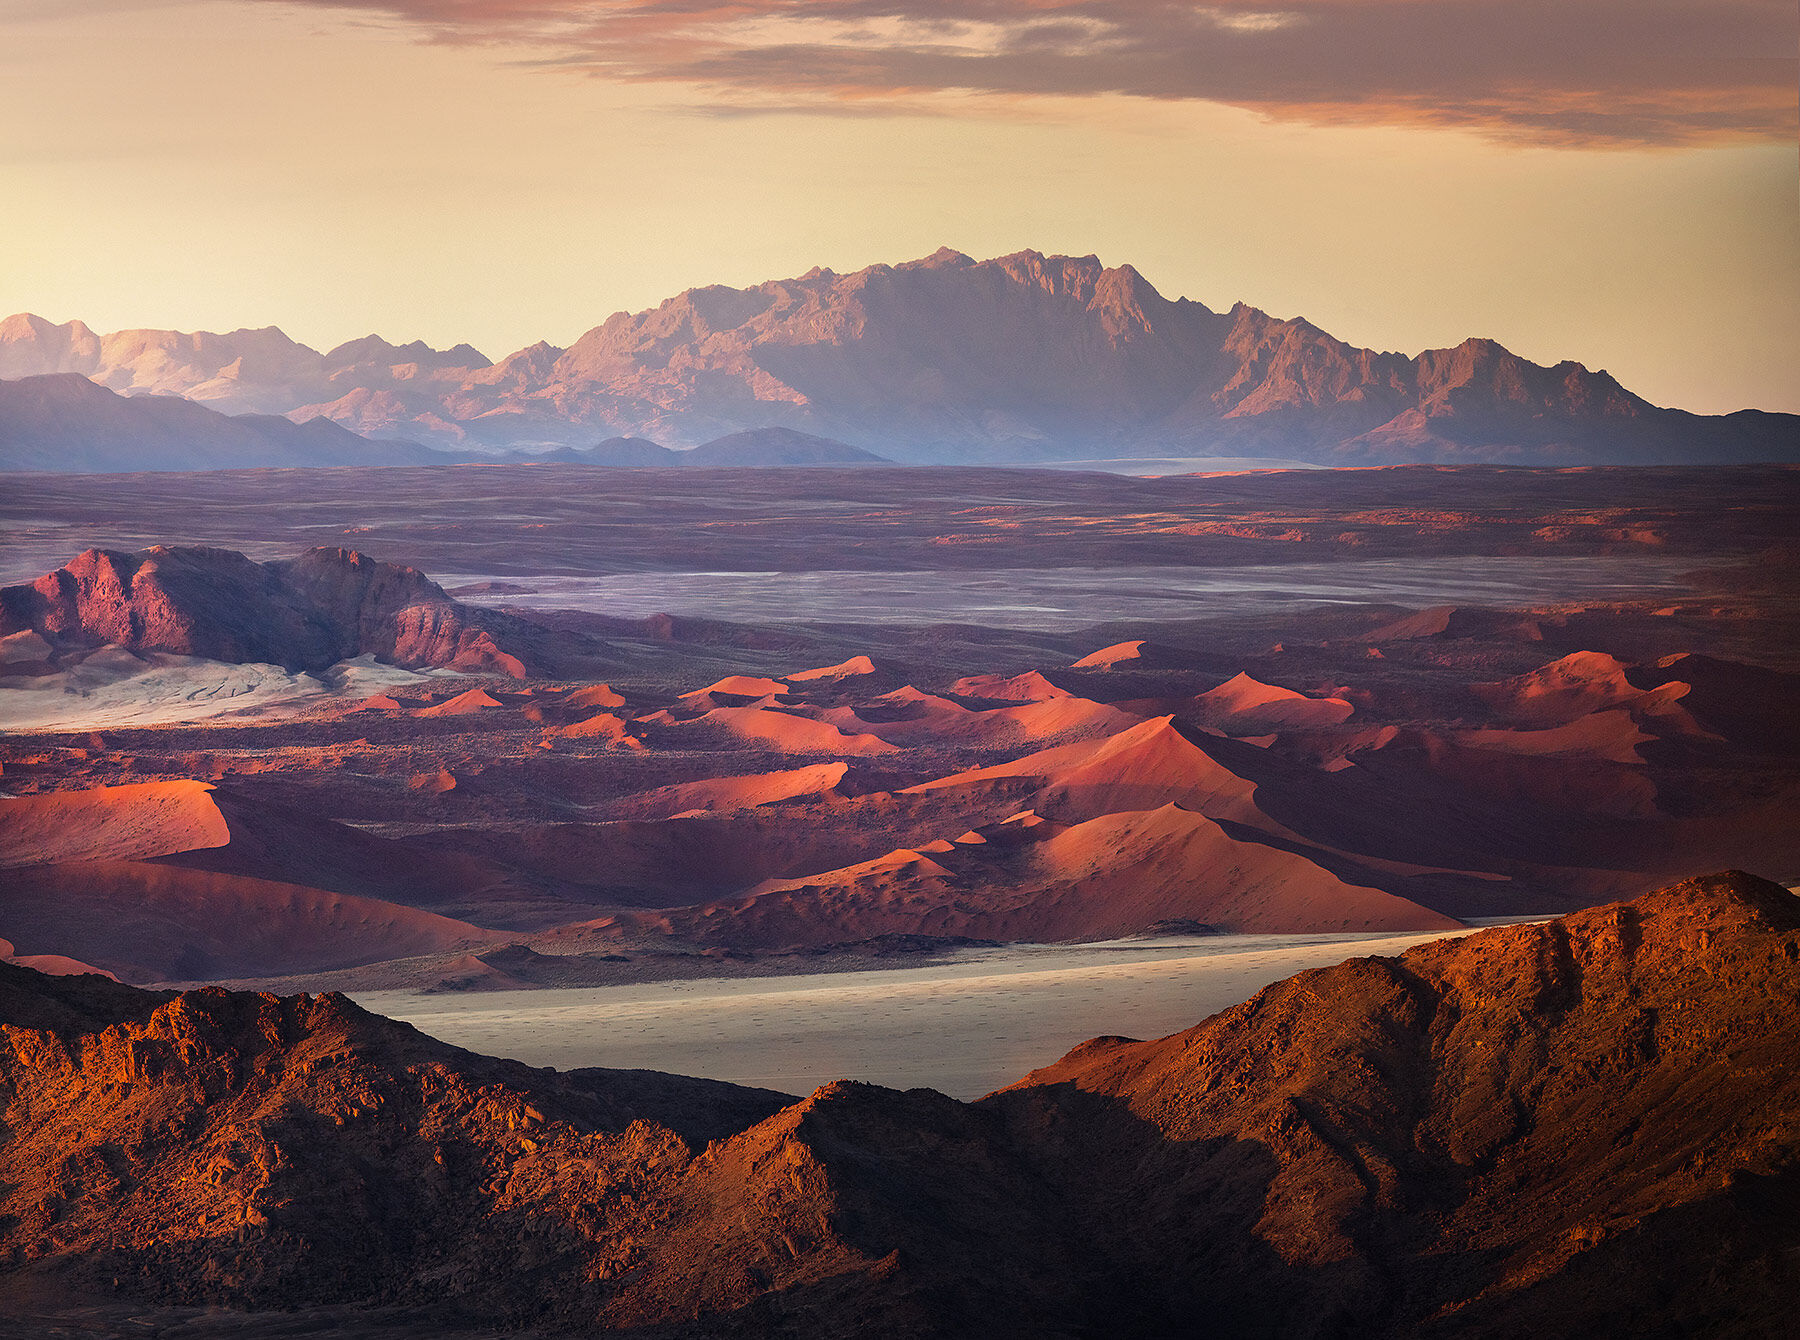 Layers of dunes and mountains at sunrise in the Namibian desert